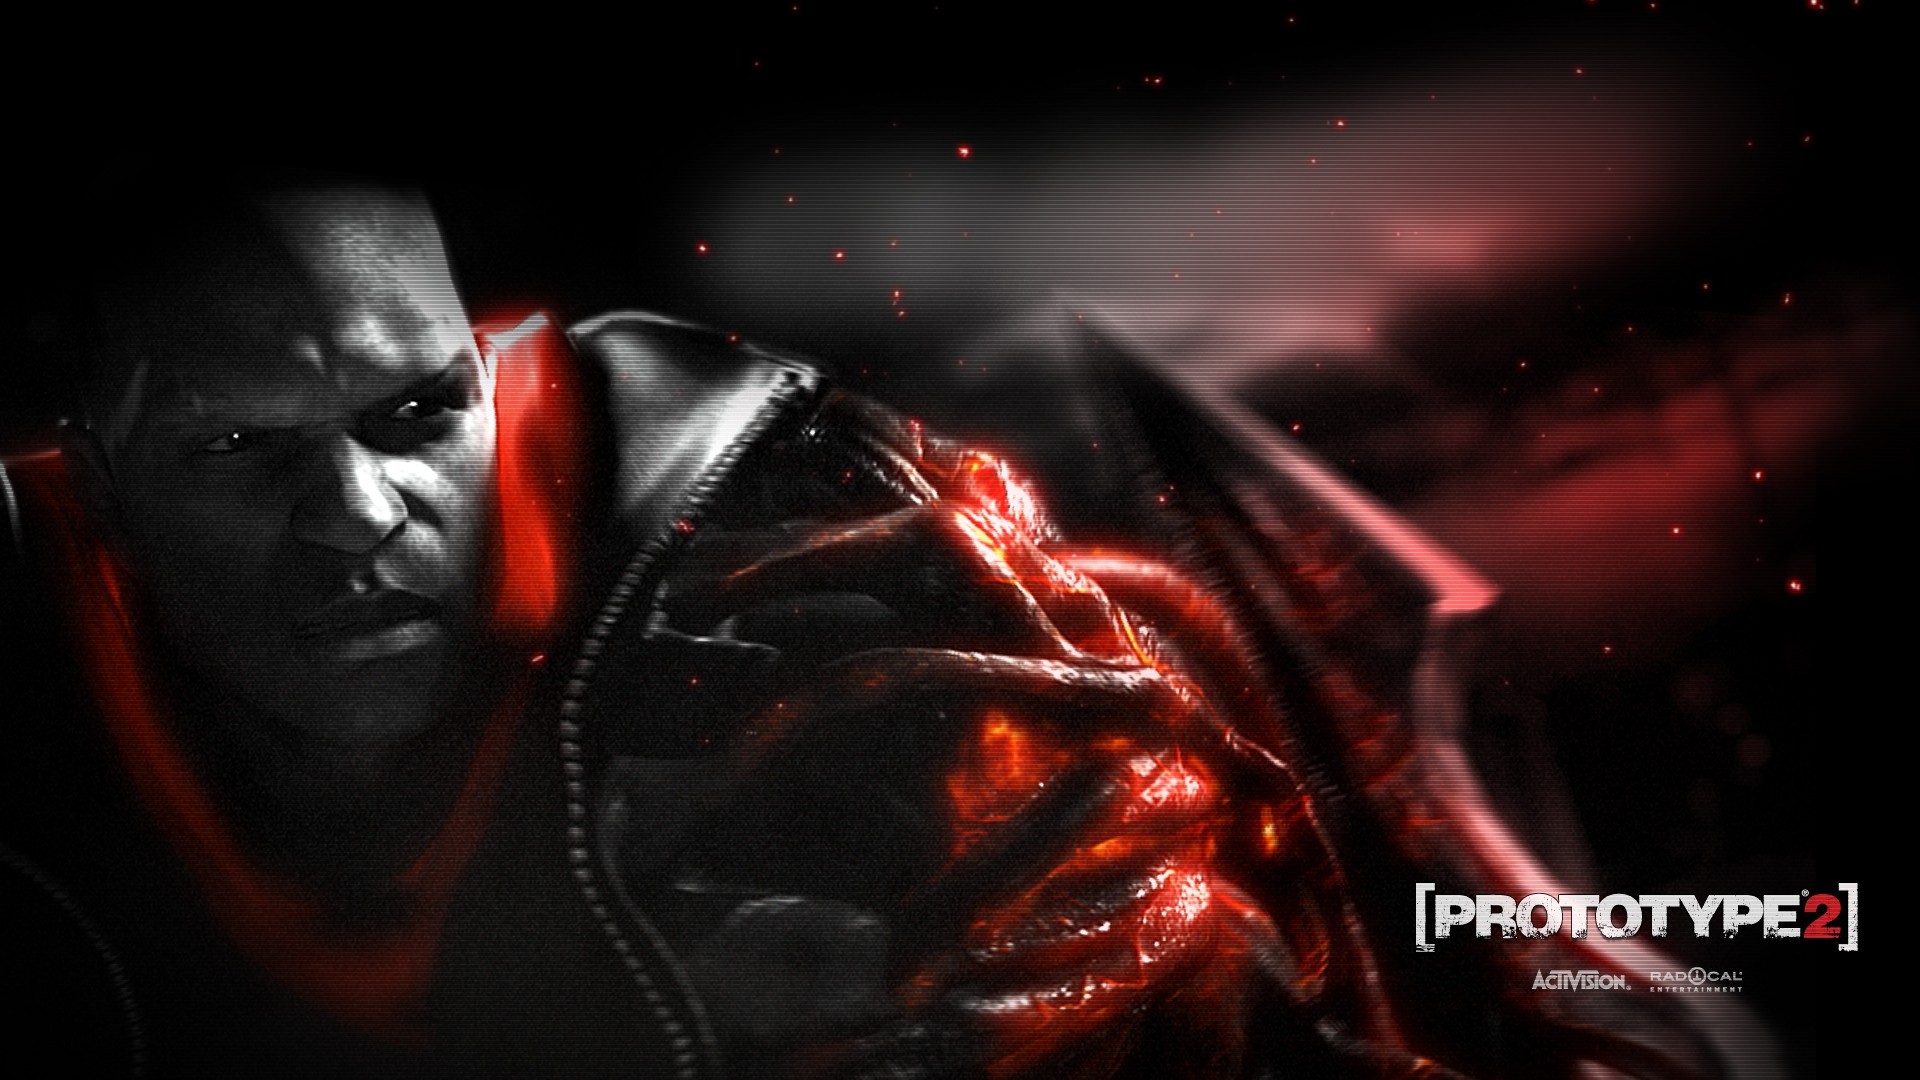 General 1920x1080 Prototype 2 video games 2012 (Year) Activision video game man